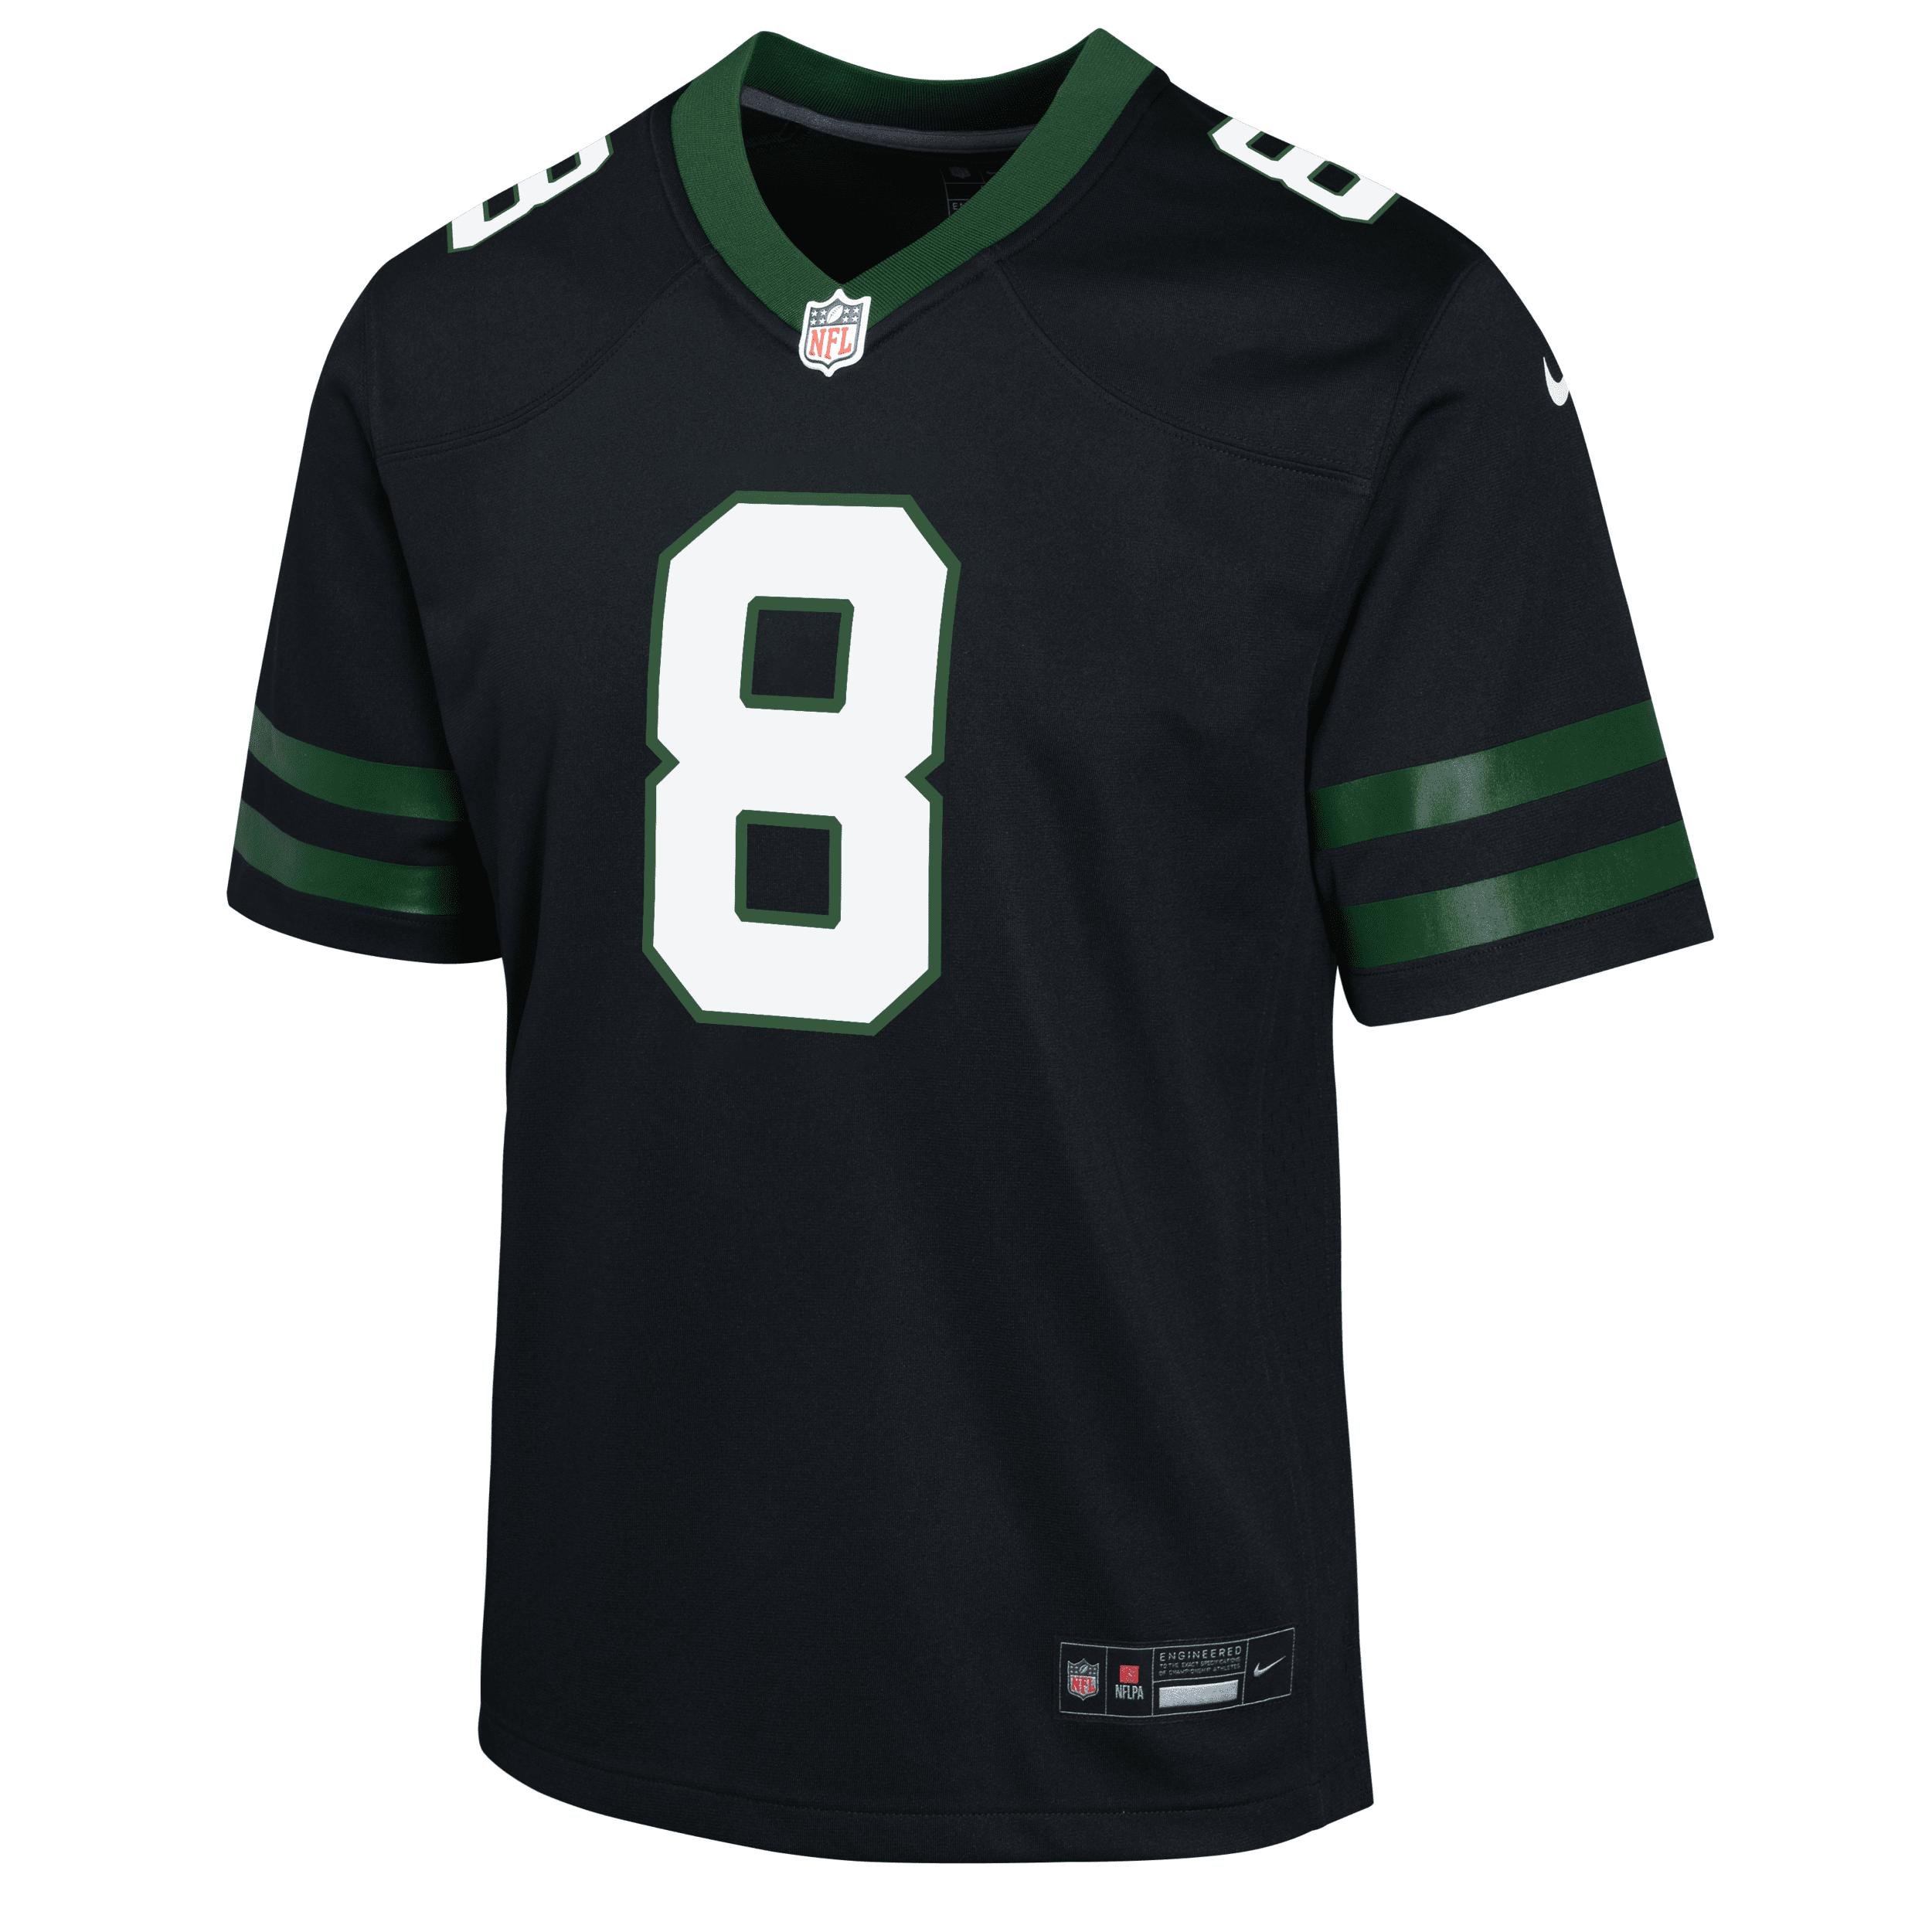 Aaron Rodgers New York Jets Big Kids' Nike NFL Game Jersey by NIKE